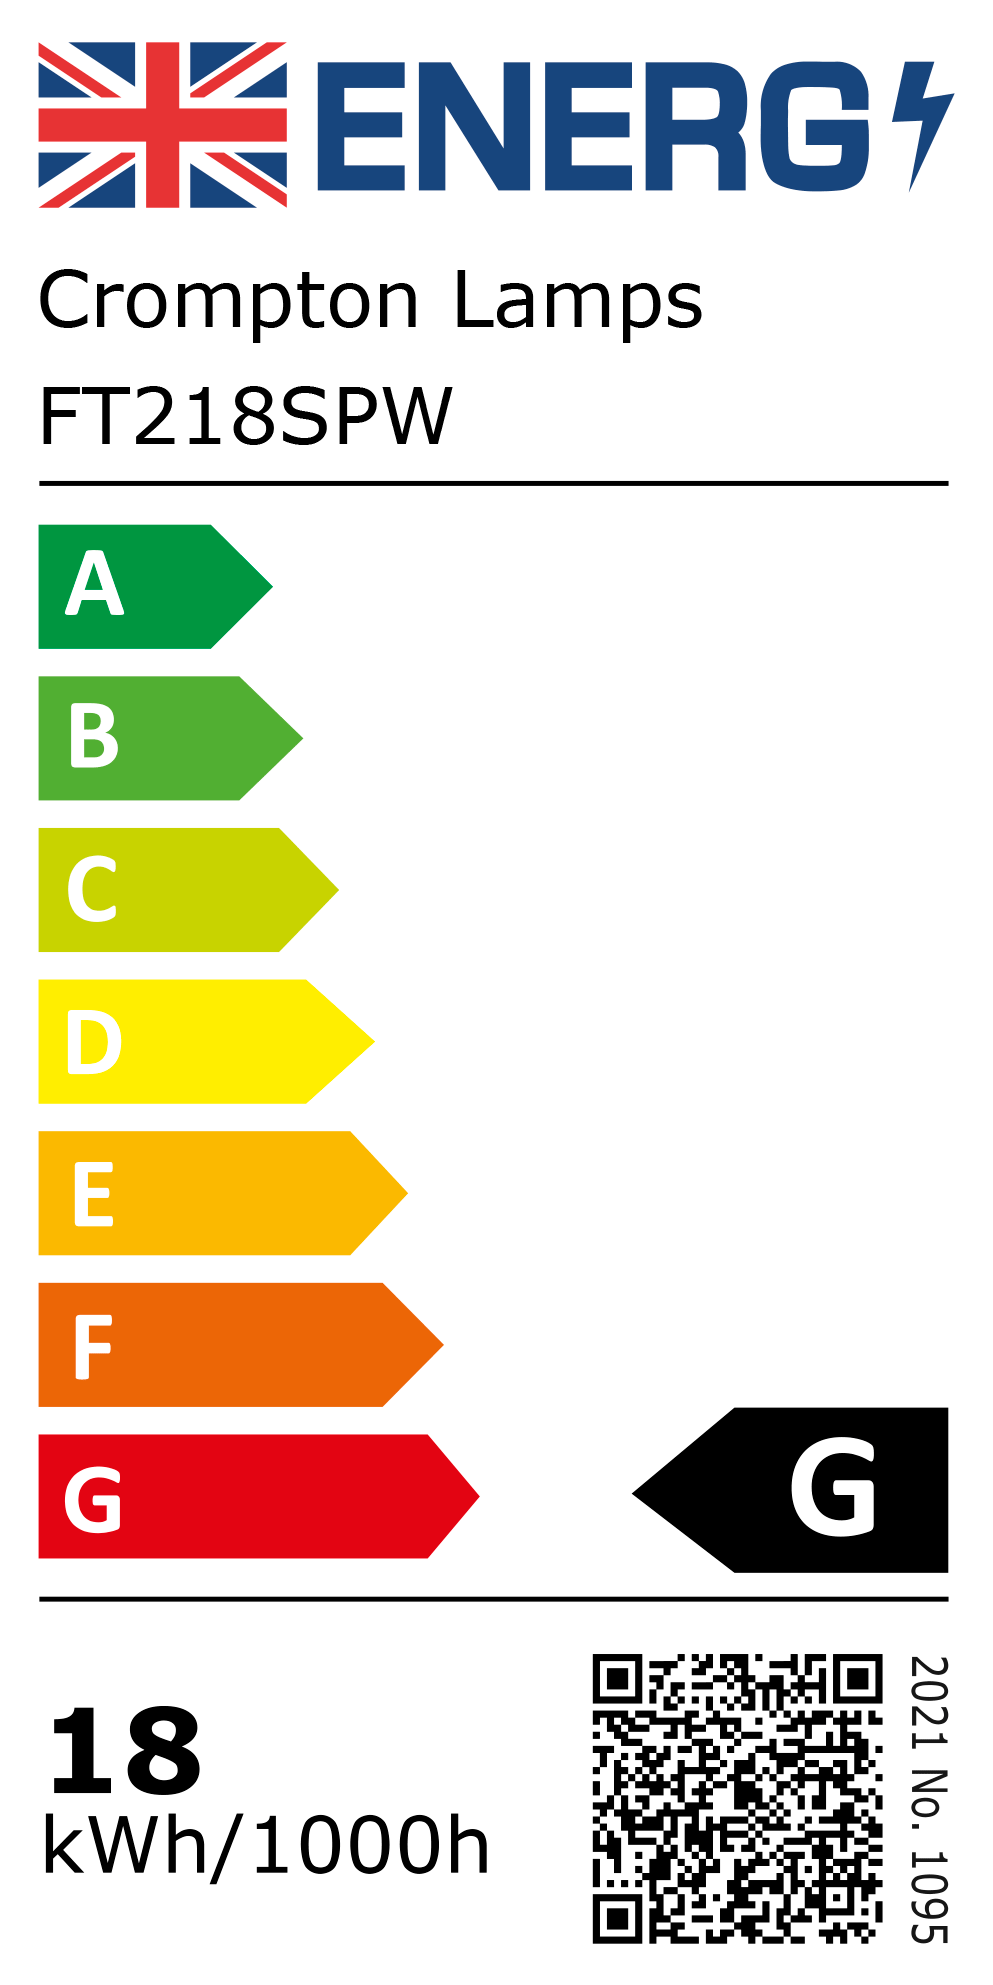 New 2021 Energy Rating Label: Stock Code FT218SPW